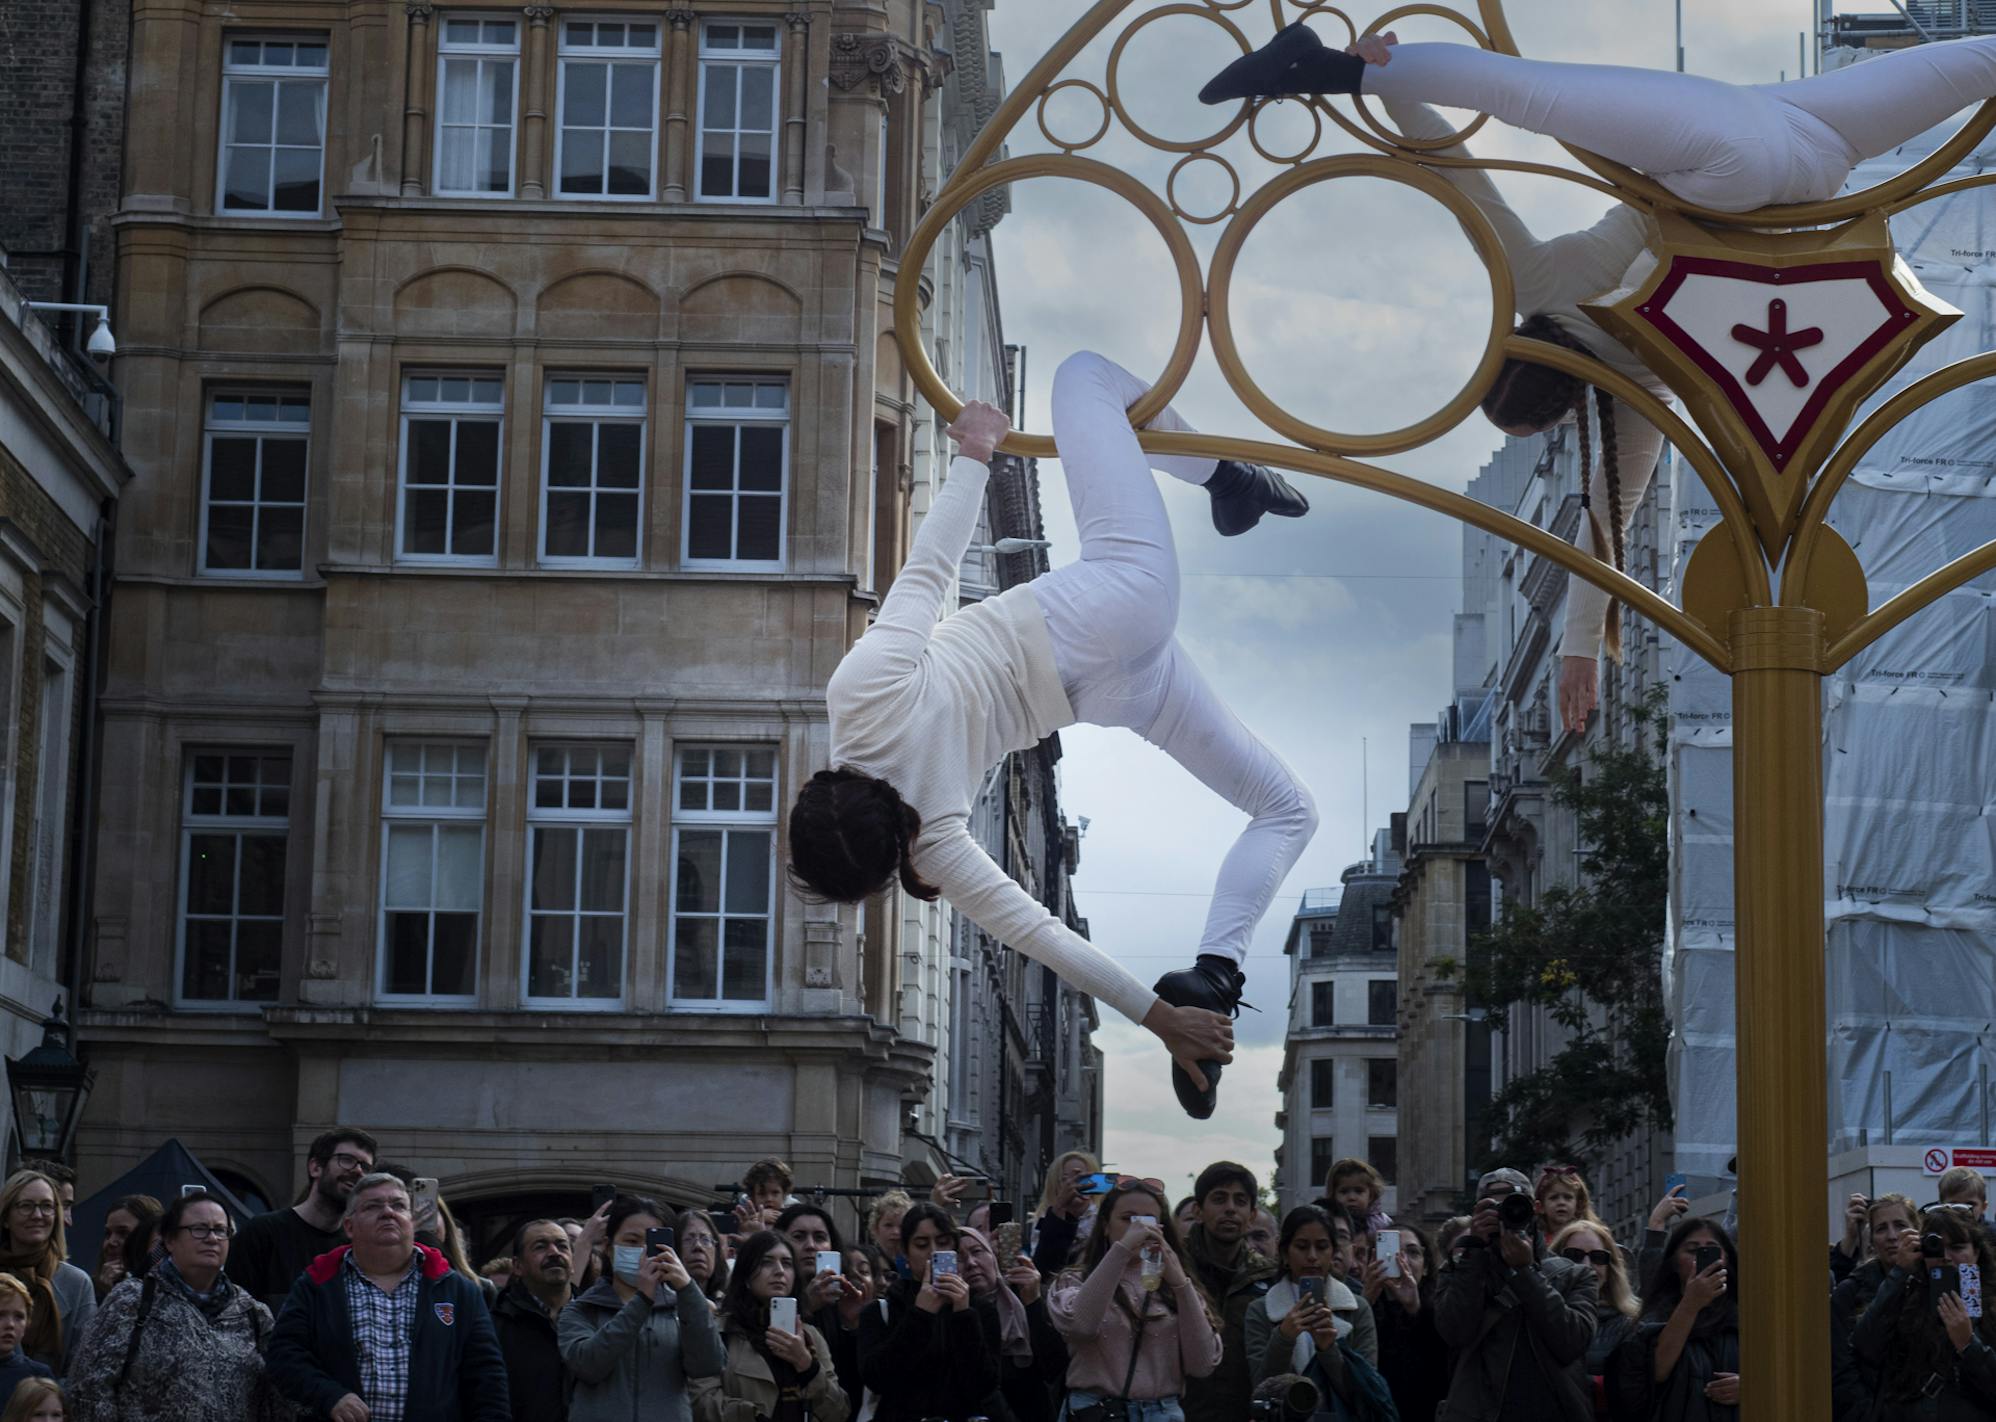 An acrobat wearing all white hangs off the edge of a giant metal key